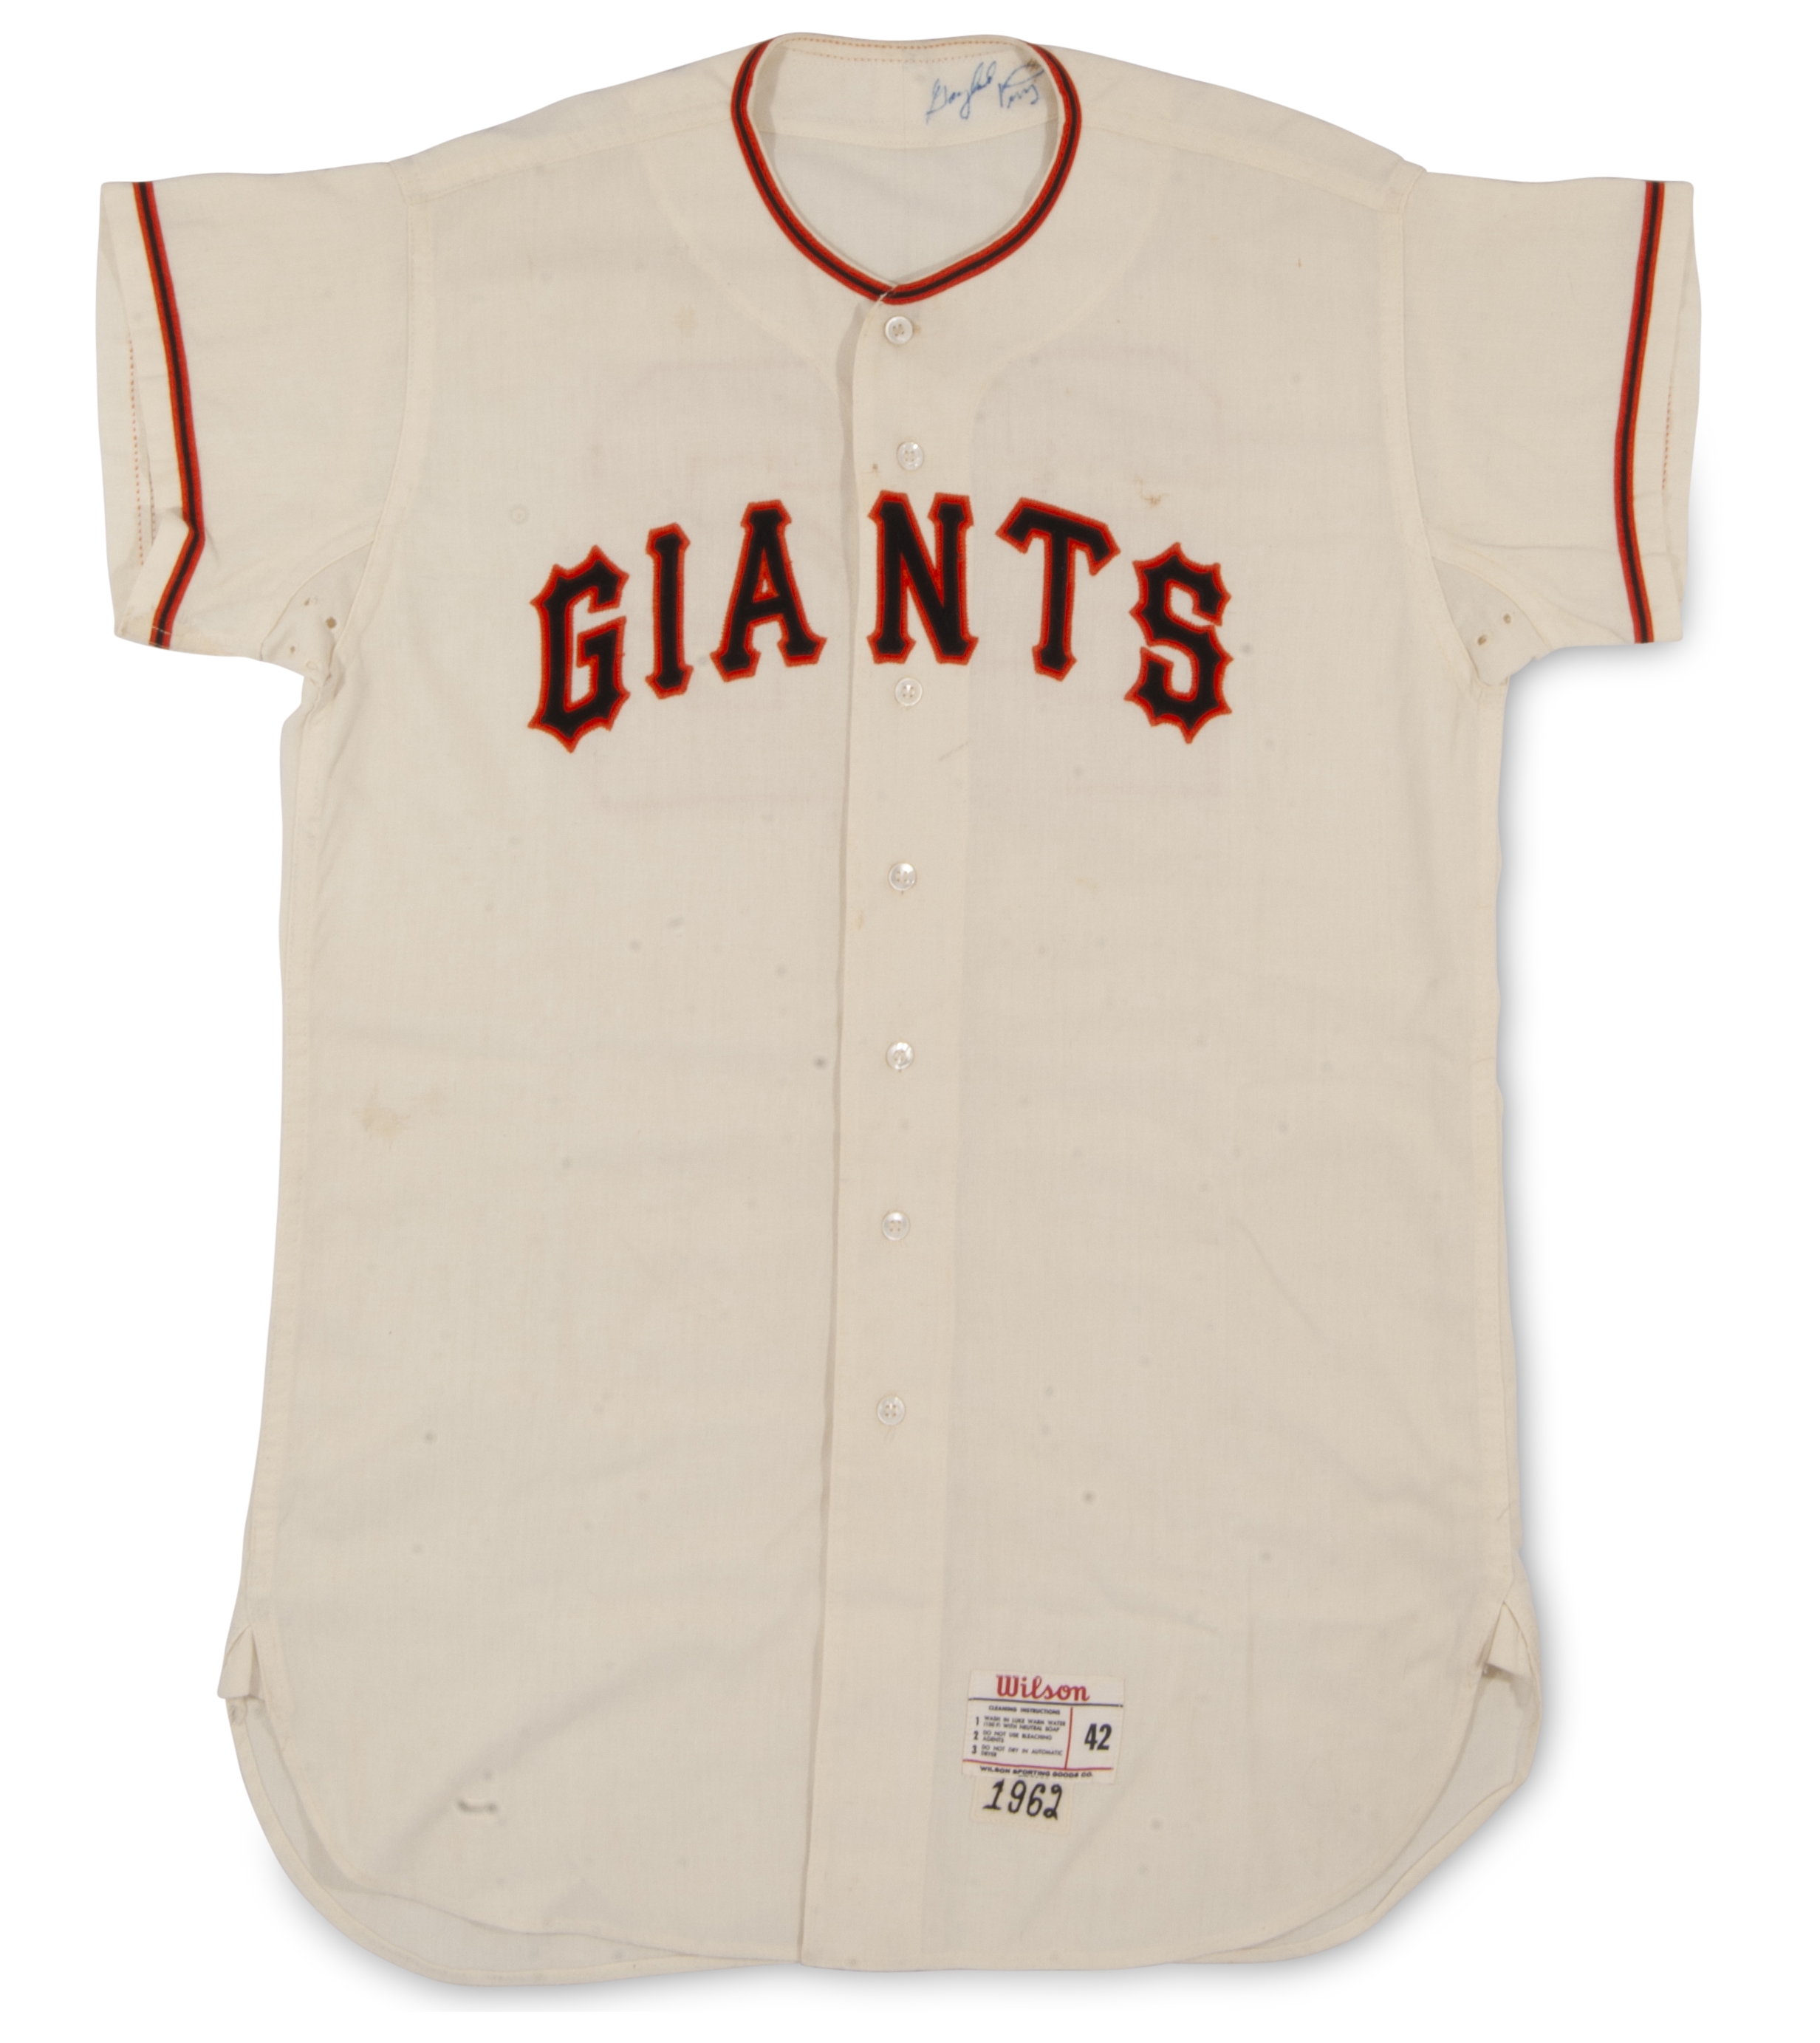 Willie Mays Signed Jersey. Baseball Collectibles Uniforms